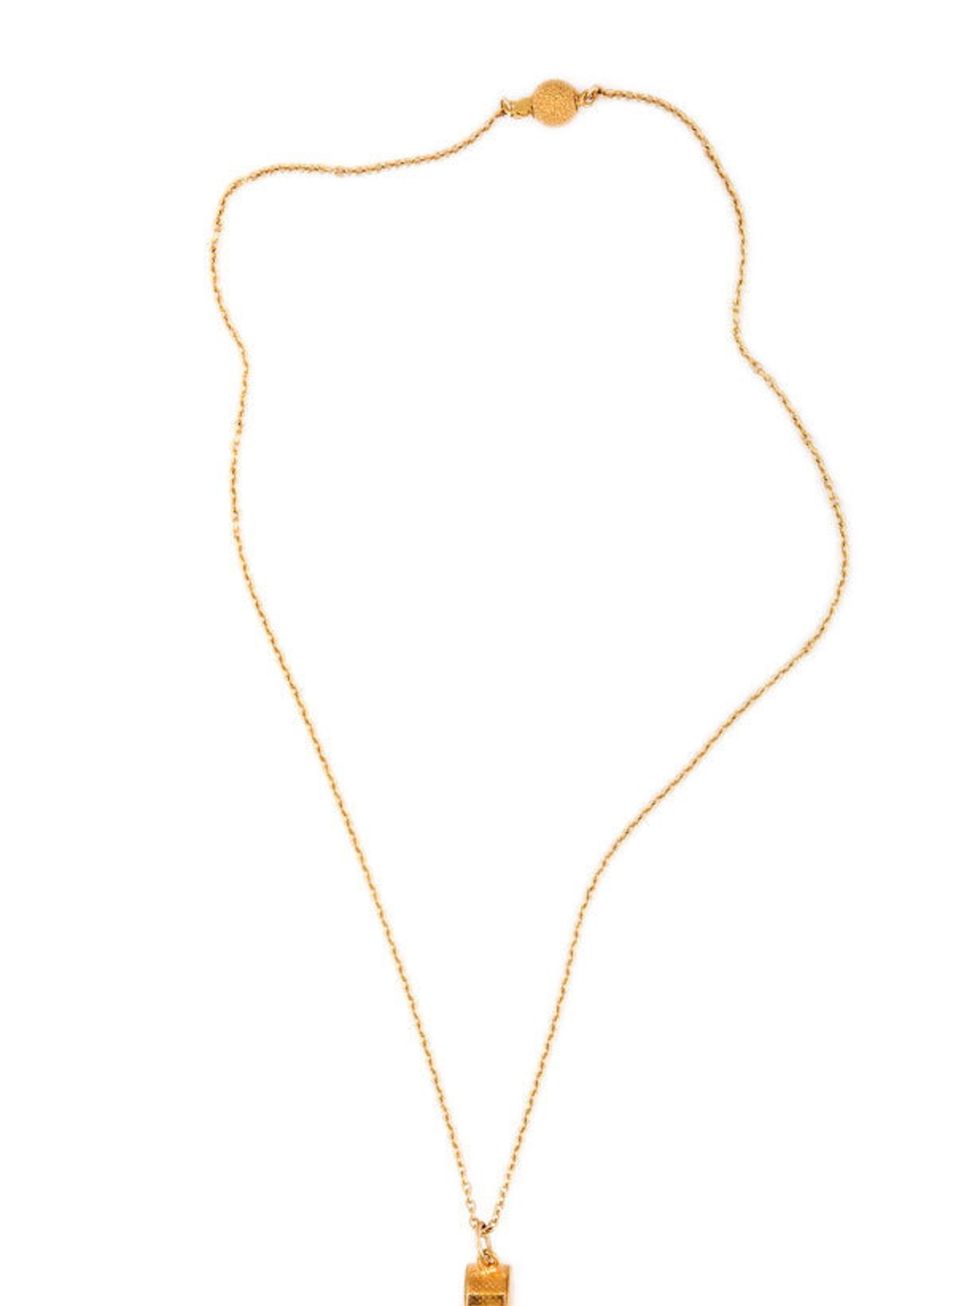 <p><a href="http://www.bexrox.com/product/whistle">Bex Rox</a> whistle necklace, £135</p>